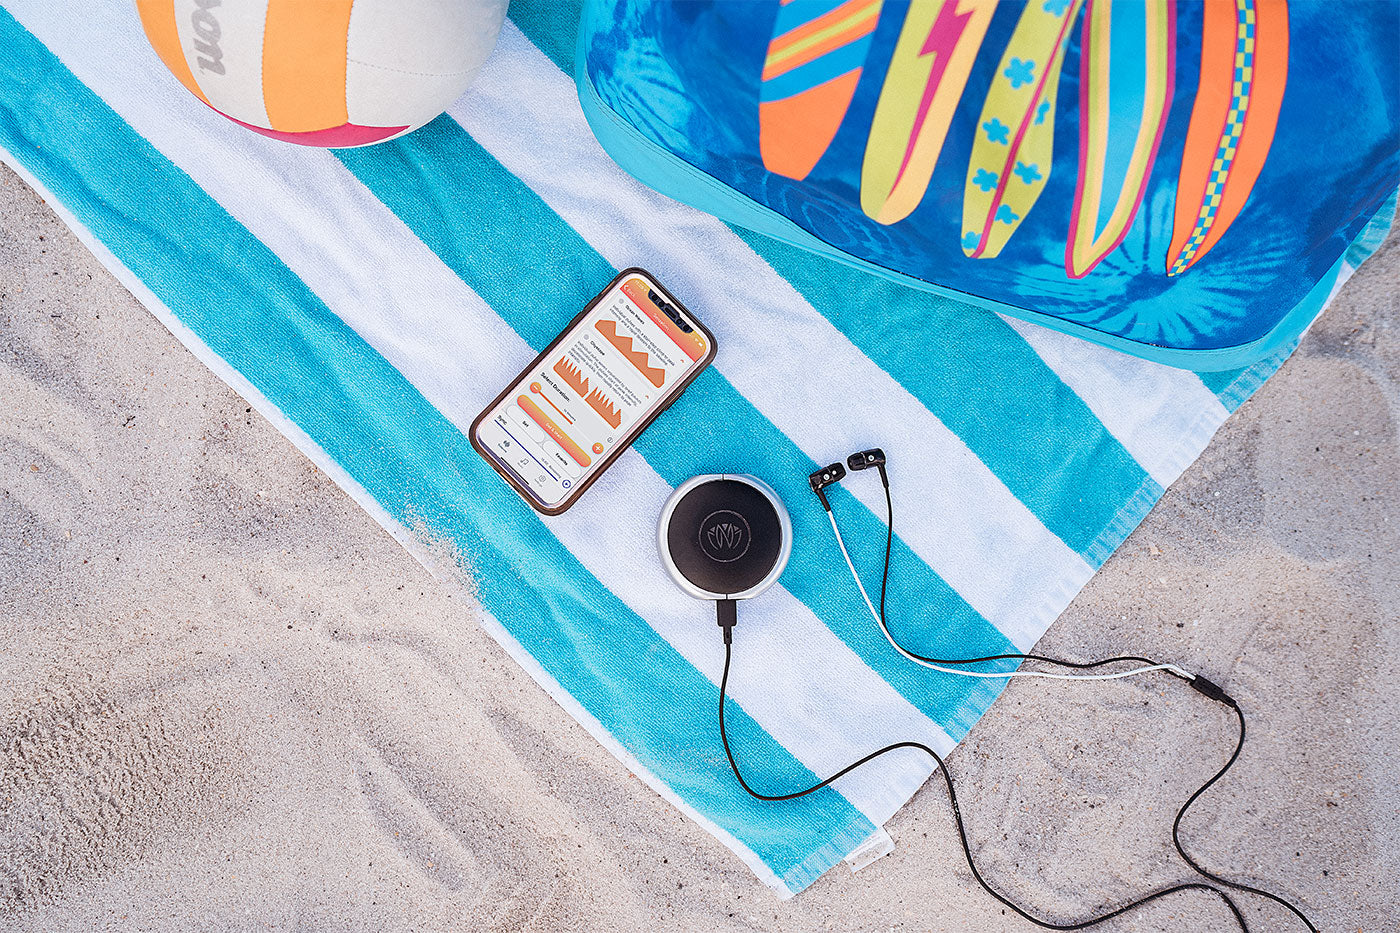 Xen by Neuvana makes discovering calm and balance easy, providing users with wellness benefits while listening to music.